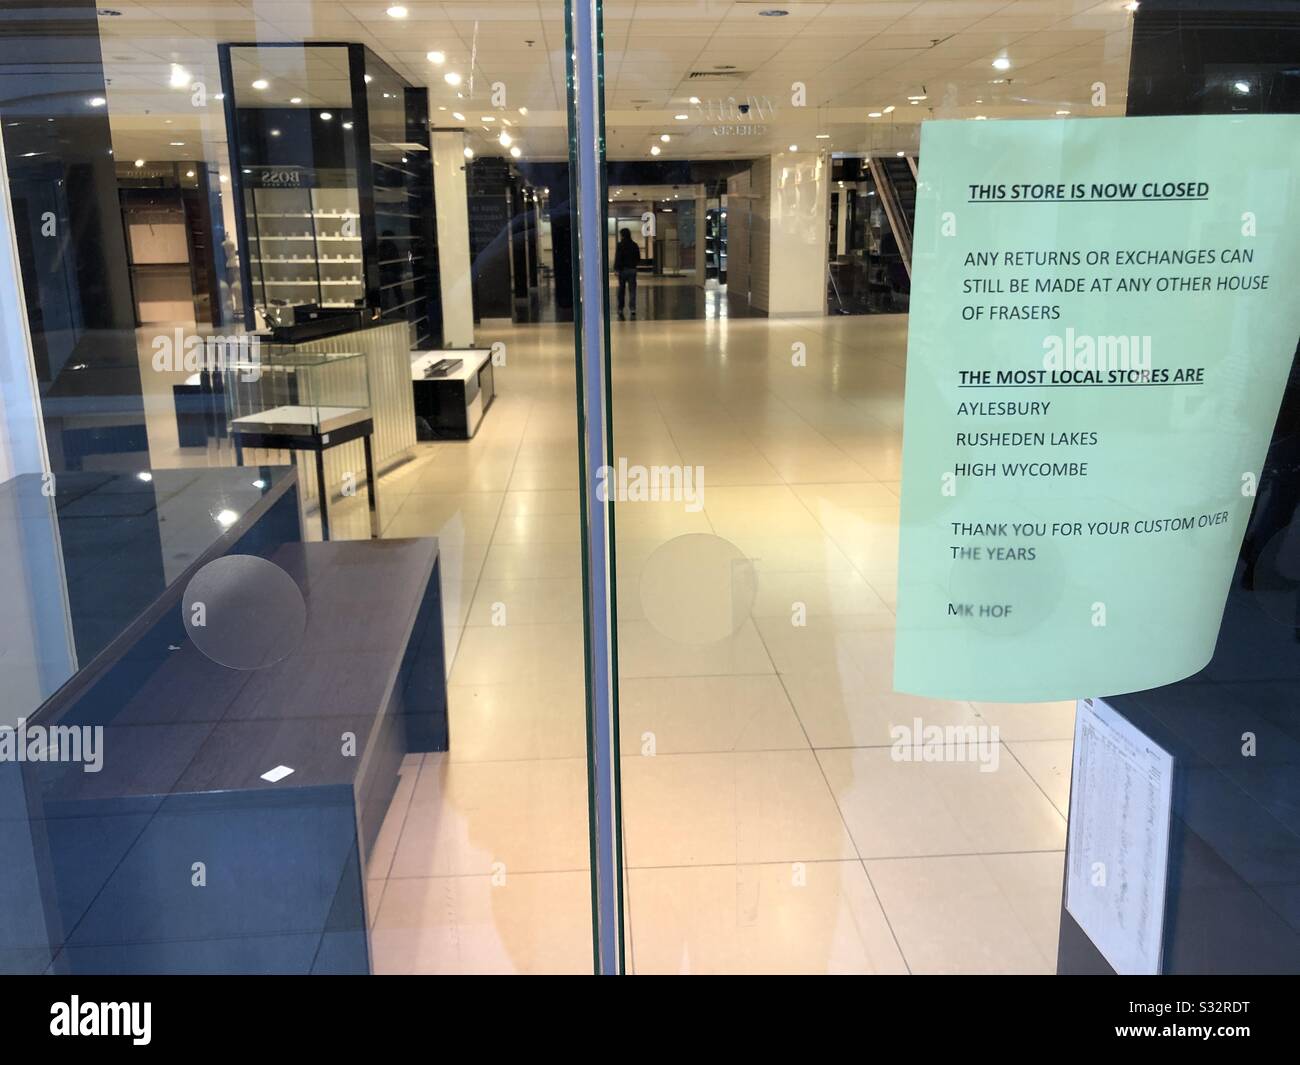 Another casualty of the crisis in the UK High Street. The Milton Keynes branch of House of Fraser closes a month after Christmas 2019 with just a few display cabinets left in a nearly empty shop. Stock Photo